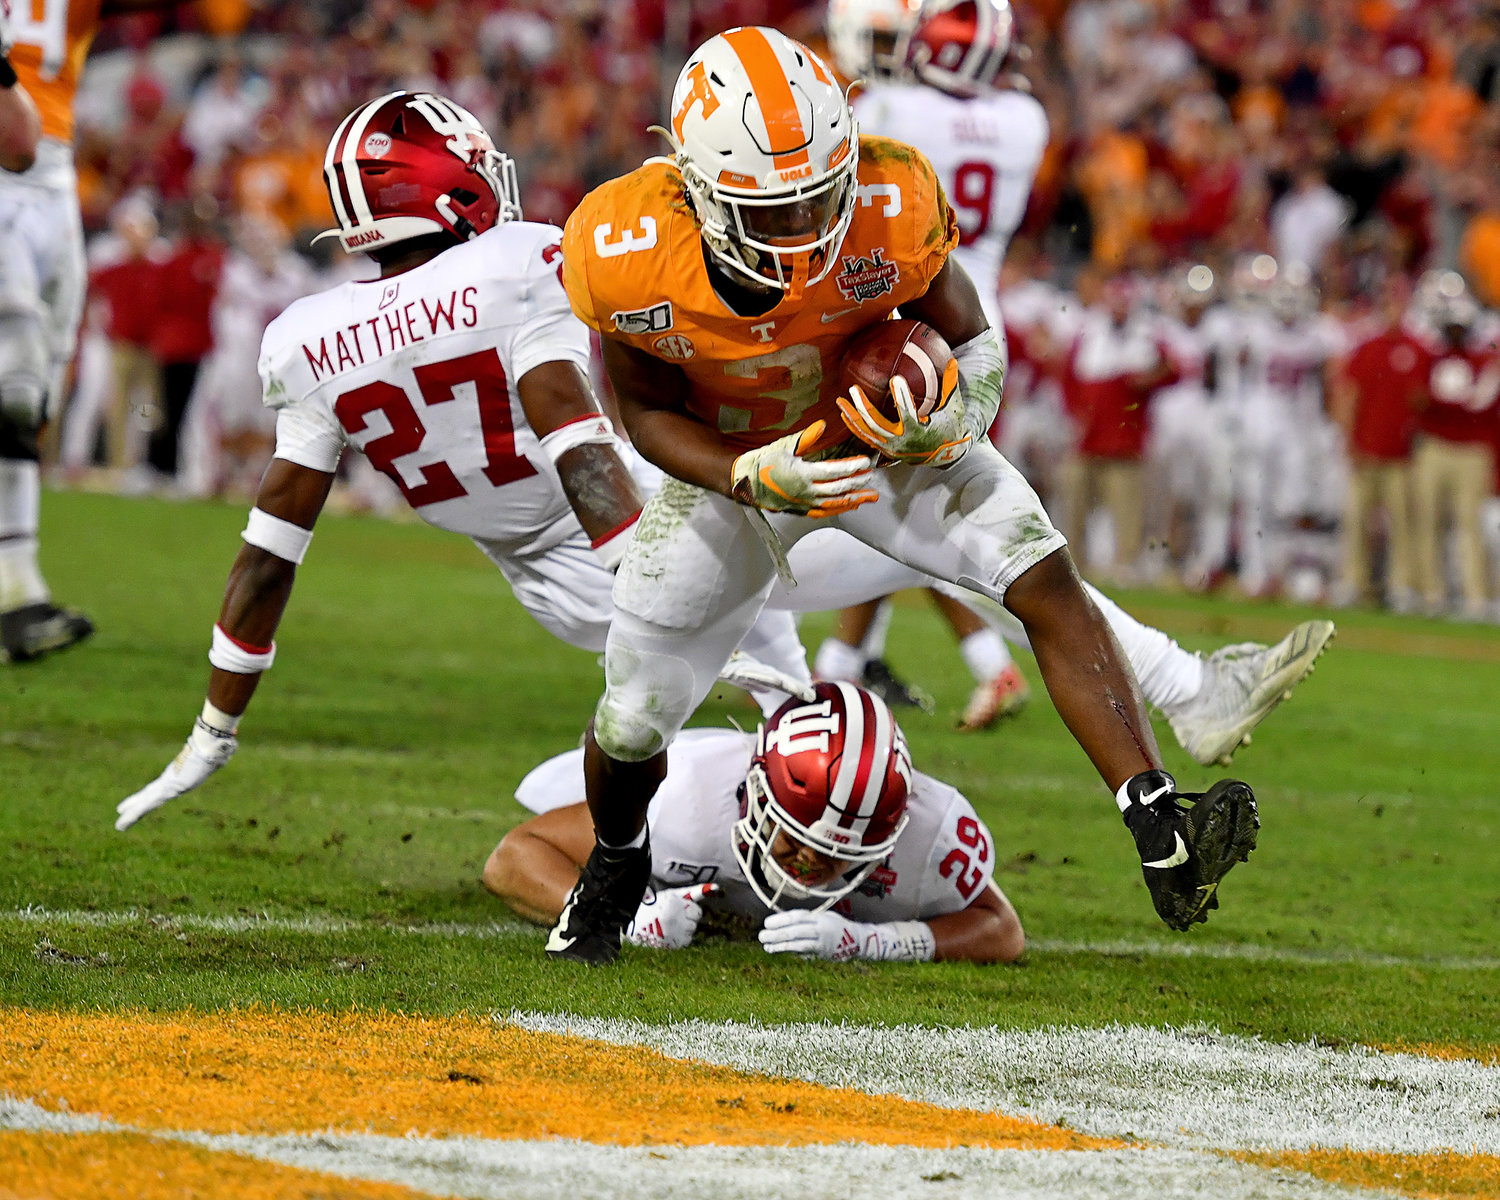 Tennessee Volunteers running back Eric Gray (3) on his way to the game-winning touchdown in the fourth quarter of the Gator Bowl NCAA football game against the Indiana Hoosiers Thursday, January 2, 2020, at TIAA Bank Field in Jacksonville, Fla.